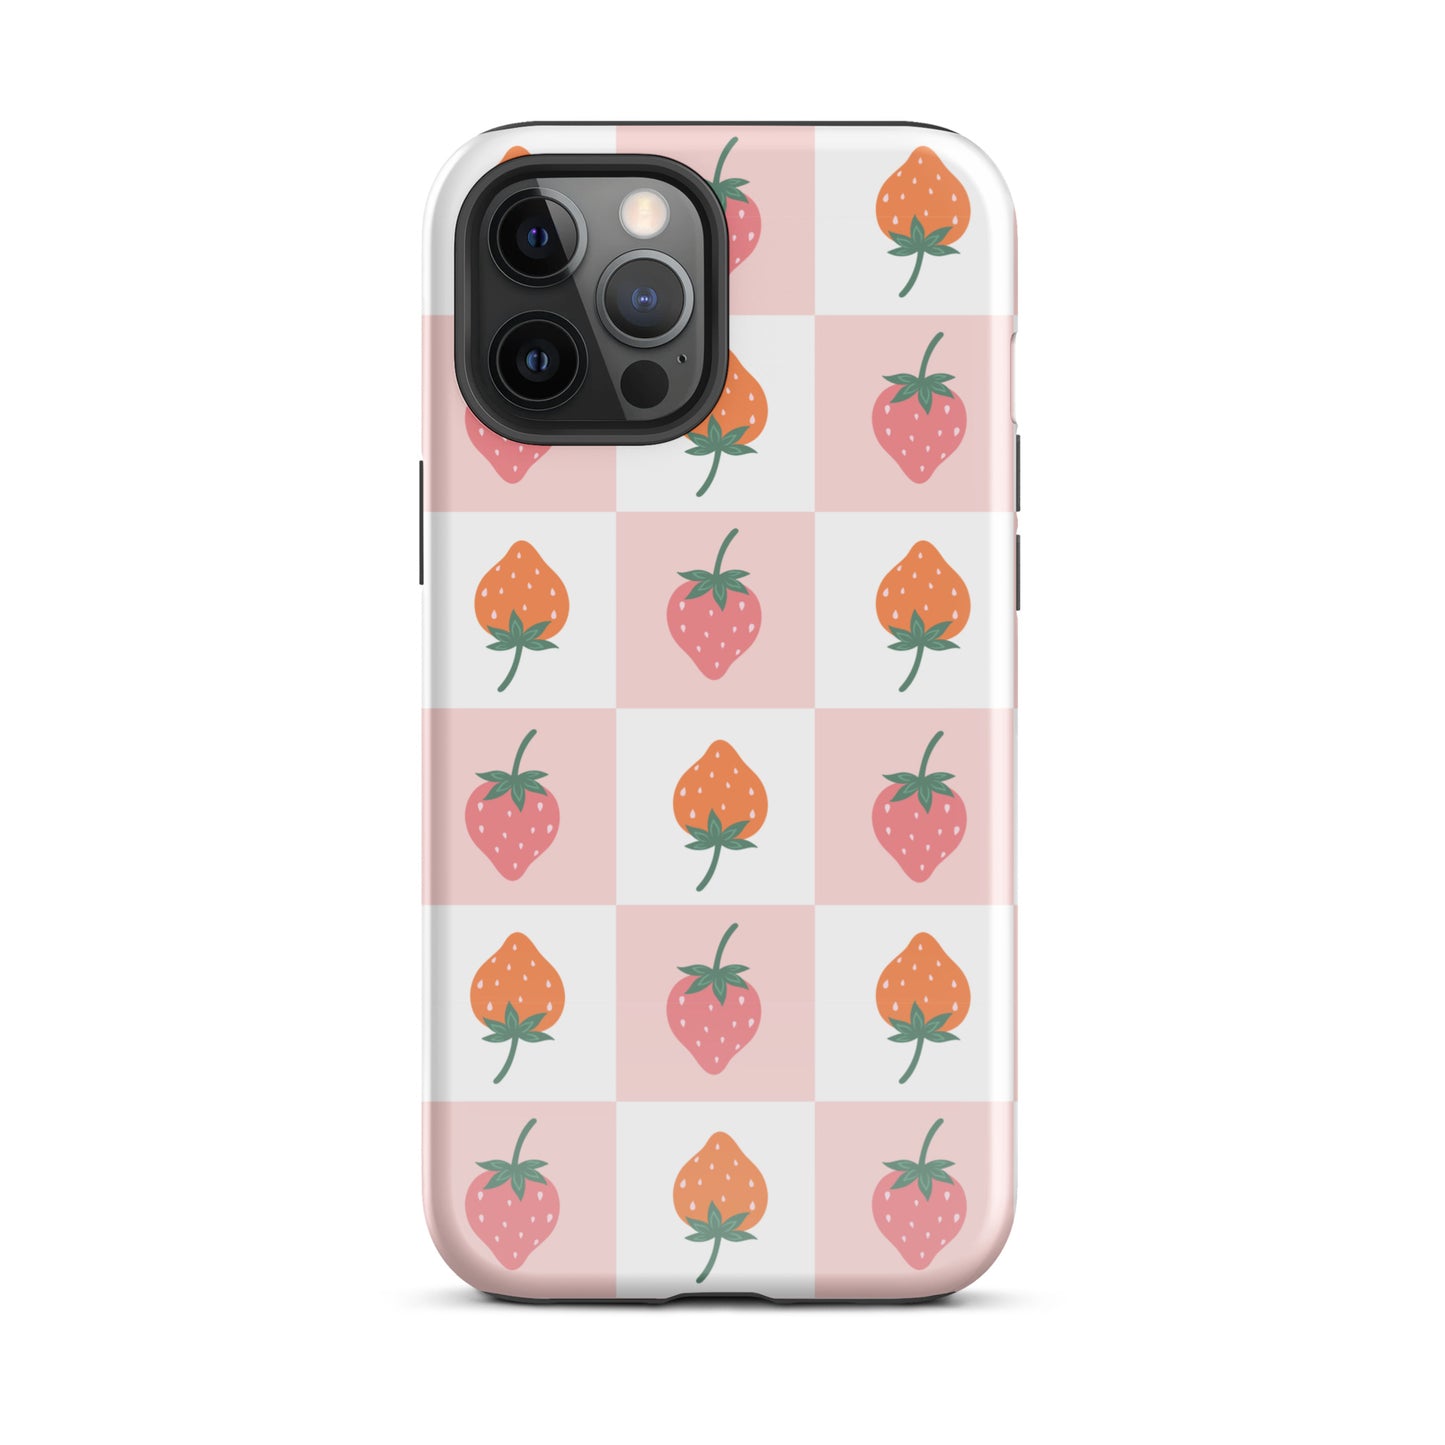 Strawberry Checkered iPhone Case iPhone 12 Pro Max Glossy